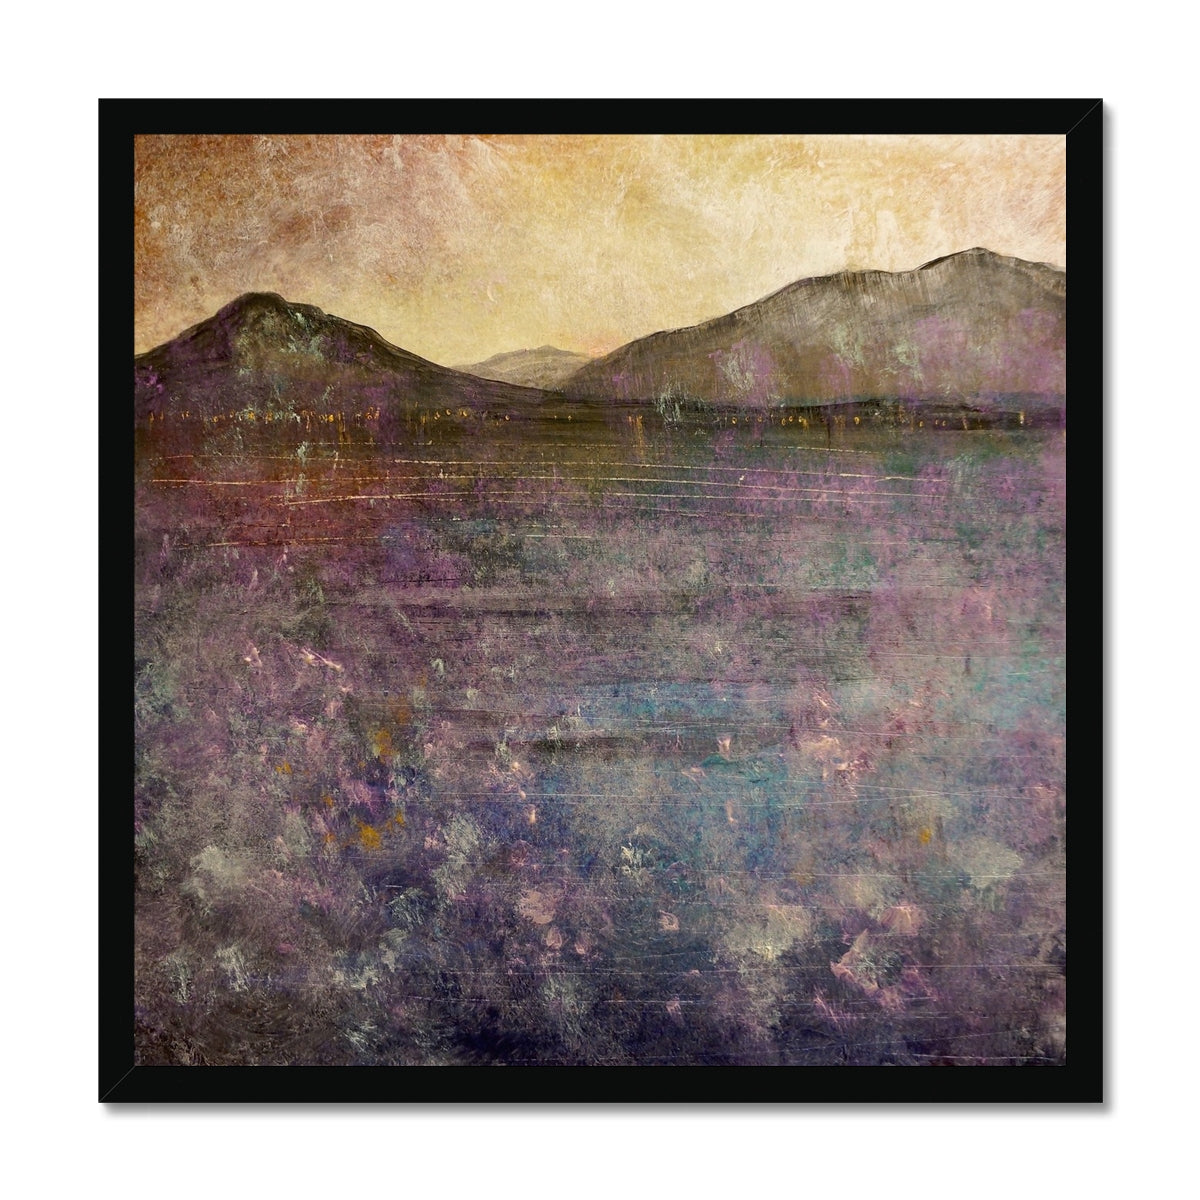 River Clyde Winter Dusk Painting | Framed Prints From Scotland-Framed Prints-River Clyde Art Gallery-20"x20"-Black Frame-Paintings, Prints, Homeware, Art Gifts From Scotland By Scottish Artist Kevin Hunter